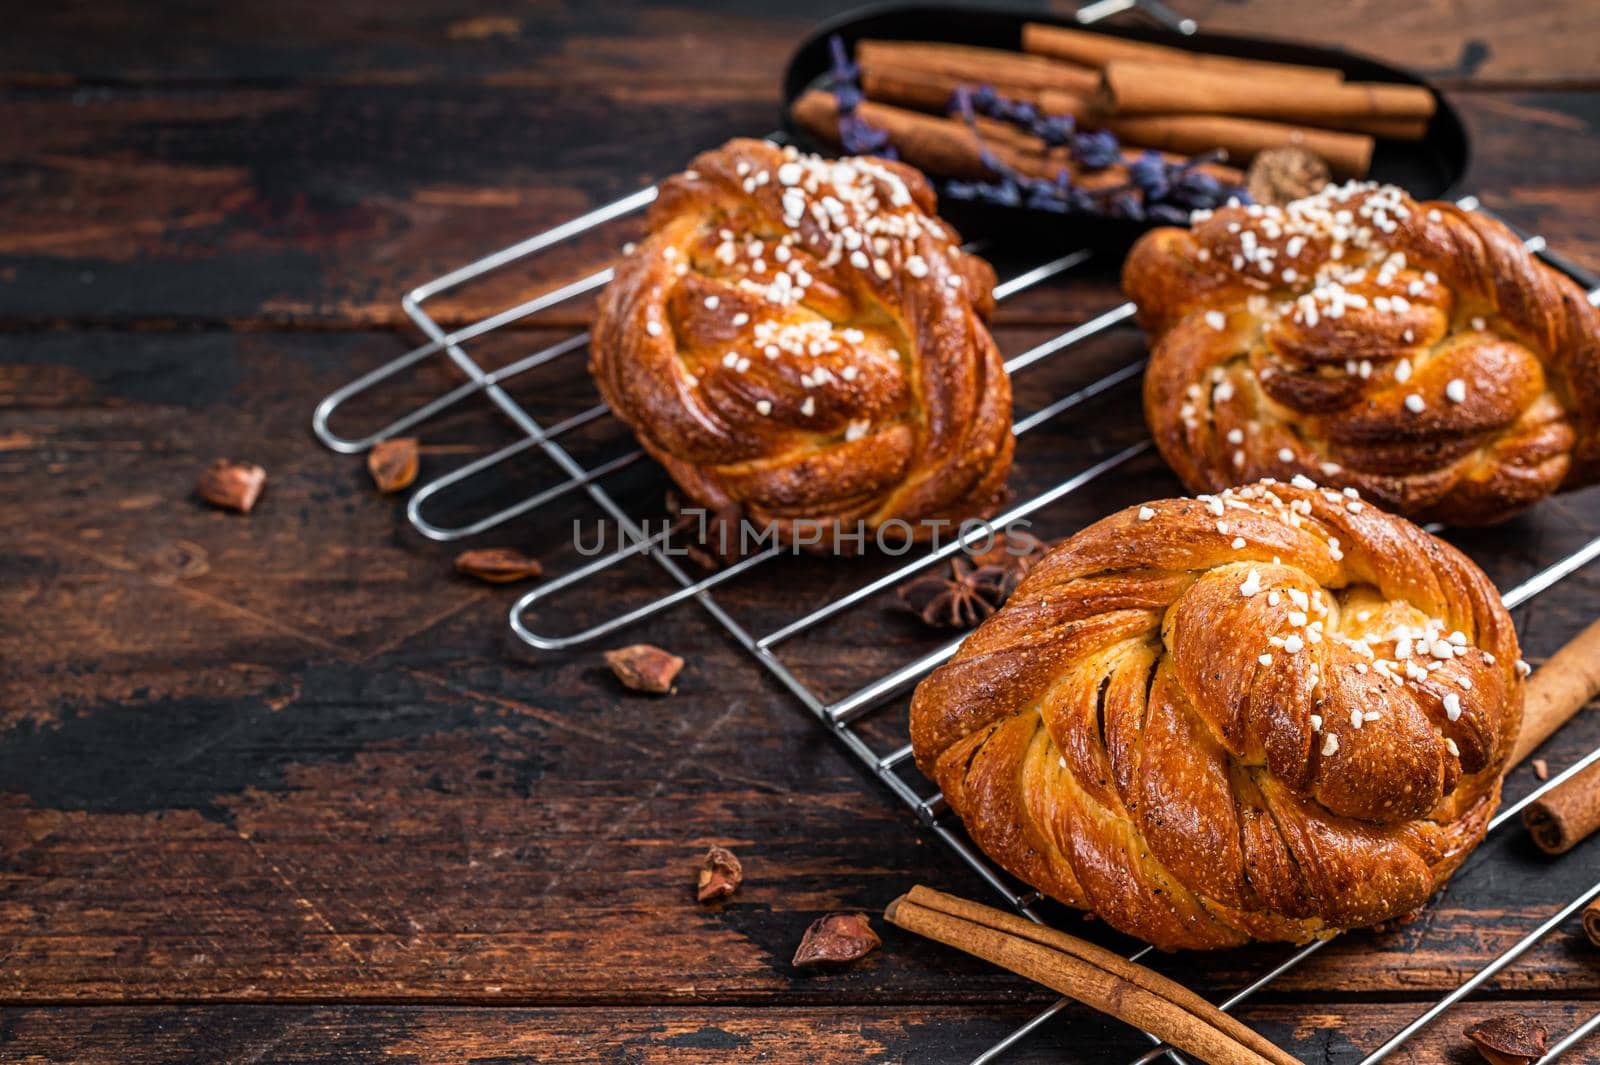 Homemade fresh baked Cinnamon buns or rolls, Swedish Kanelbullar. Dark wooden background. Top view. Copy space by Composter